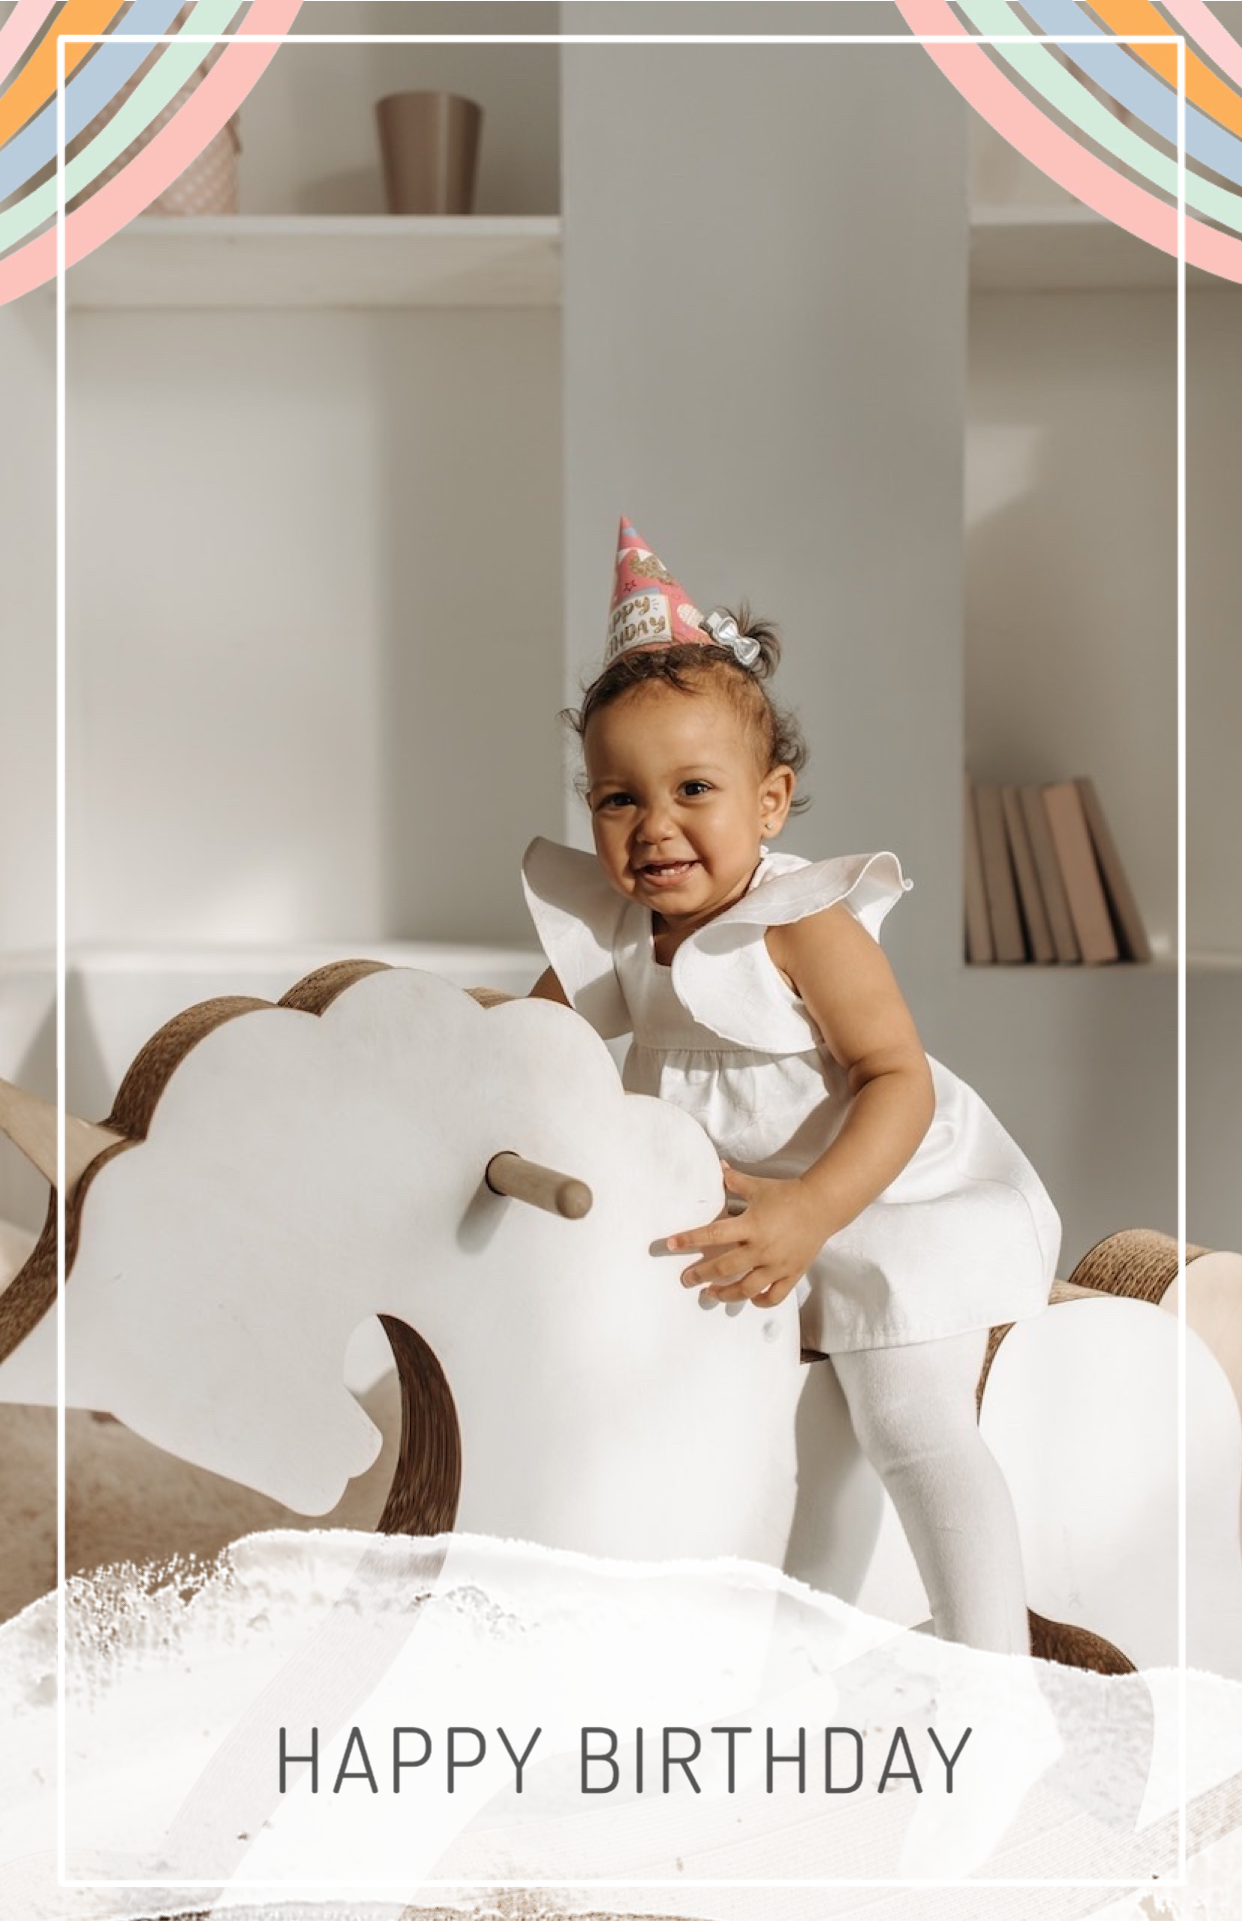 Child playing with unicorn crown happy birthday template